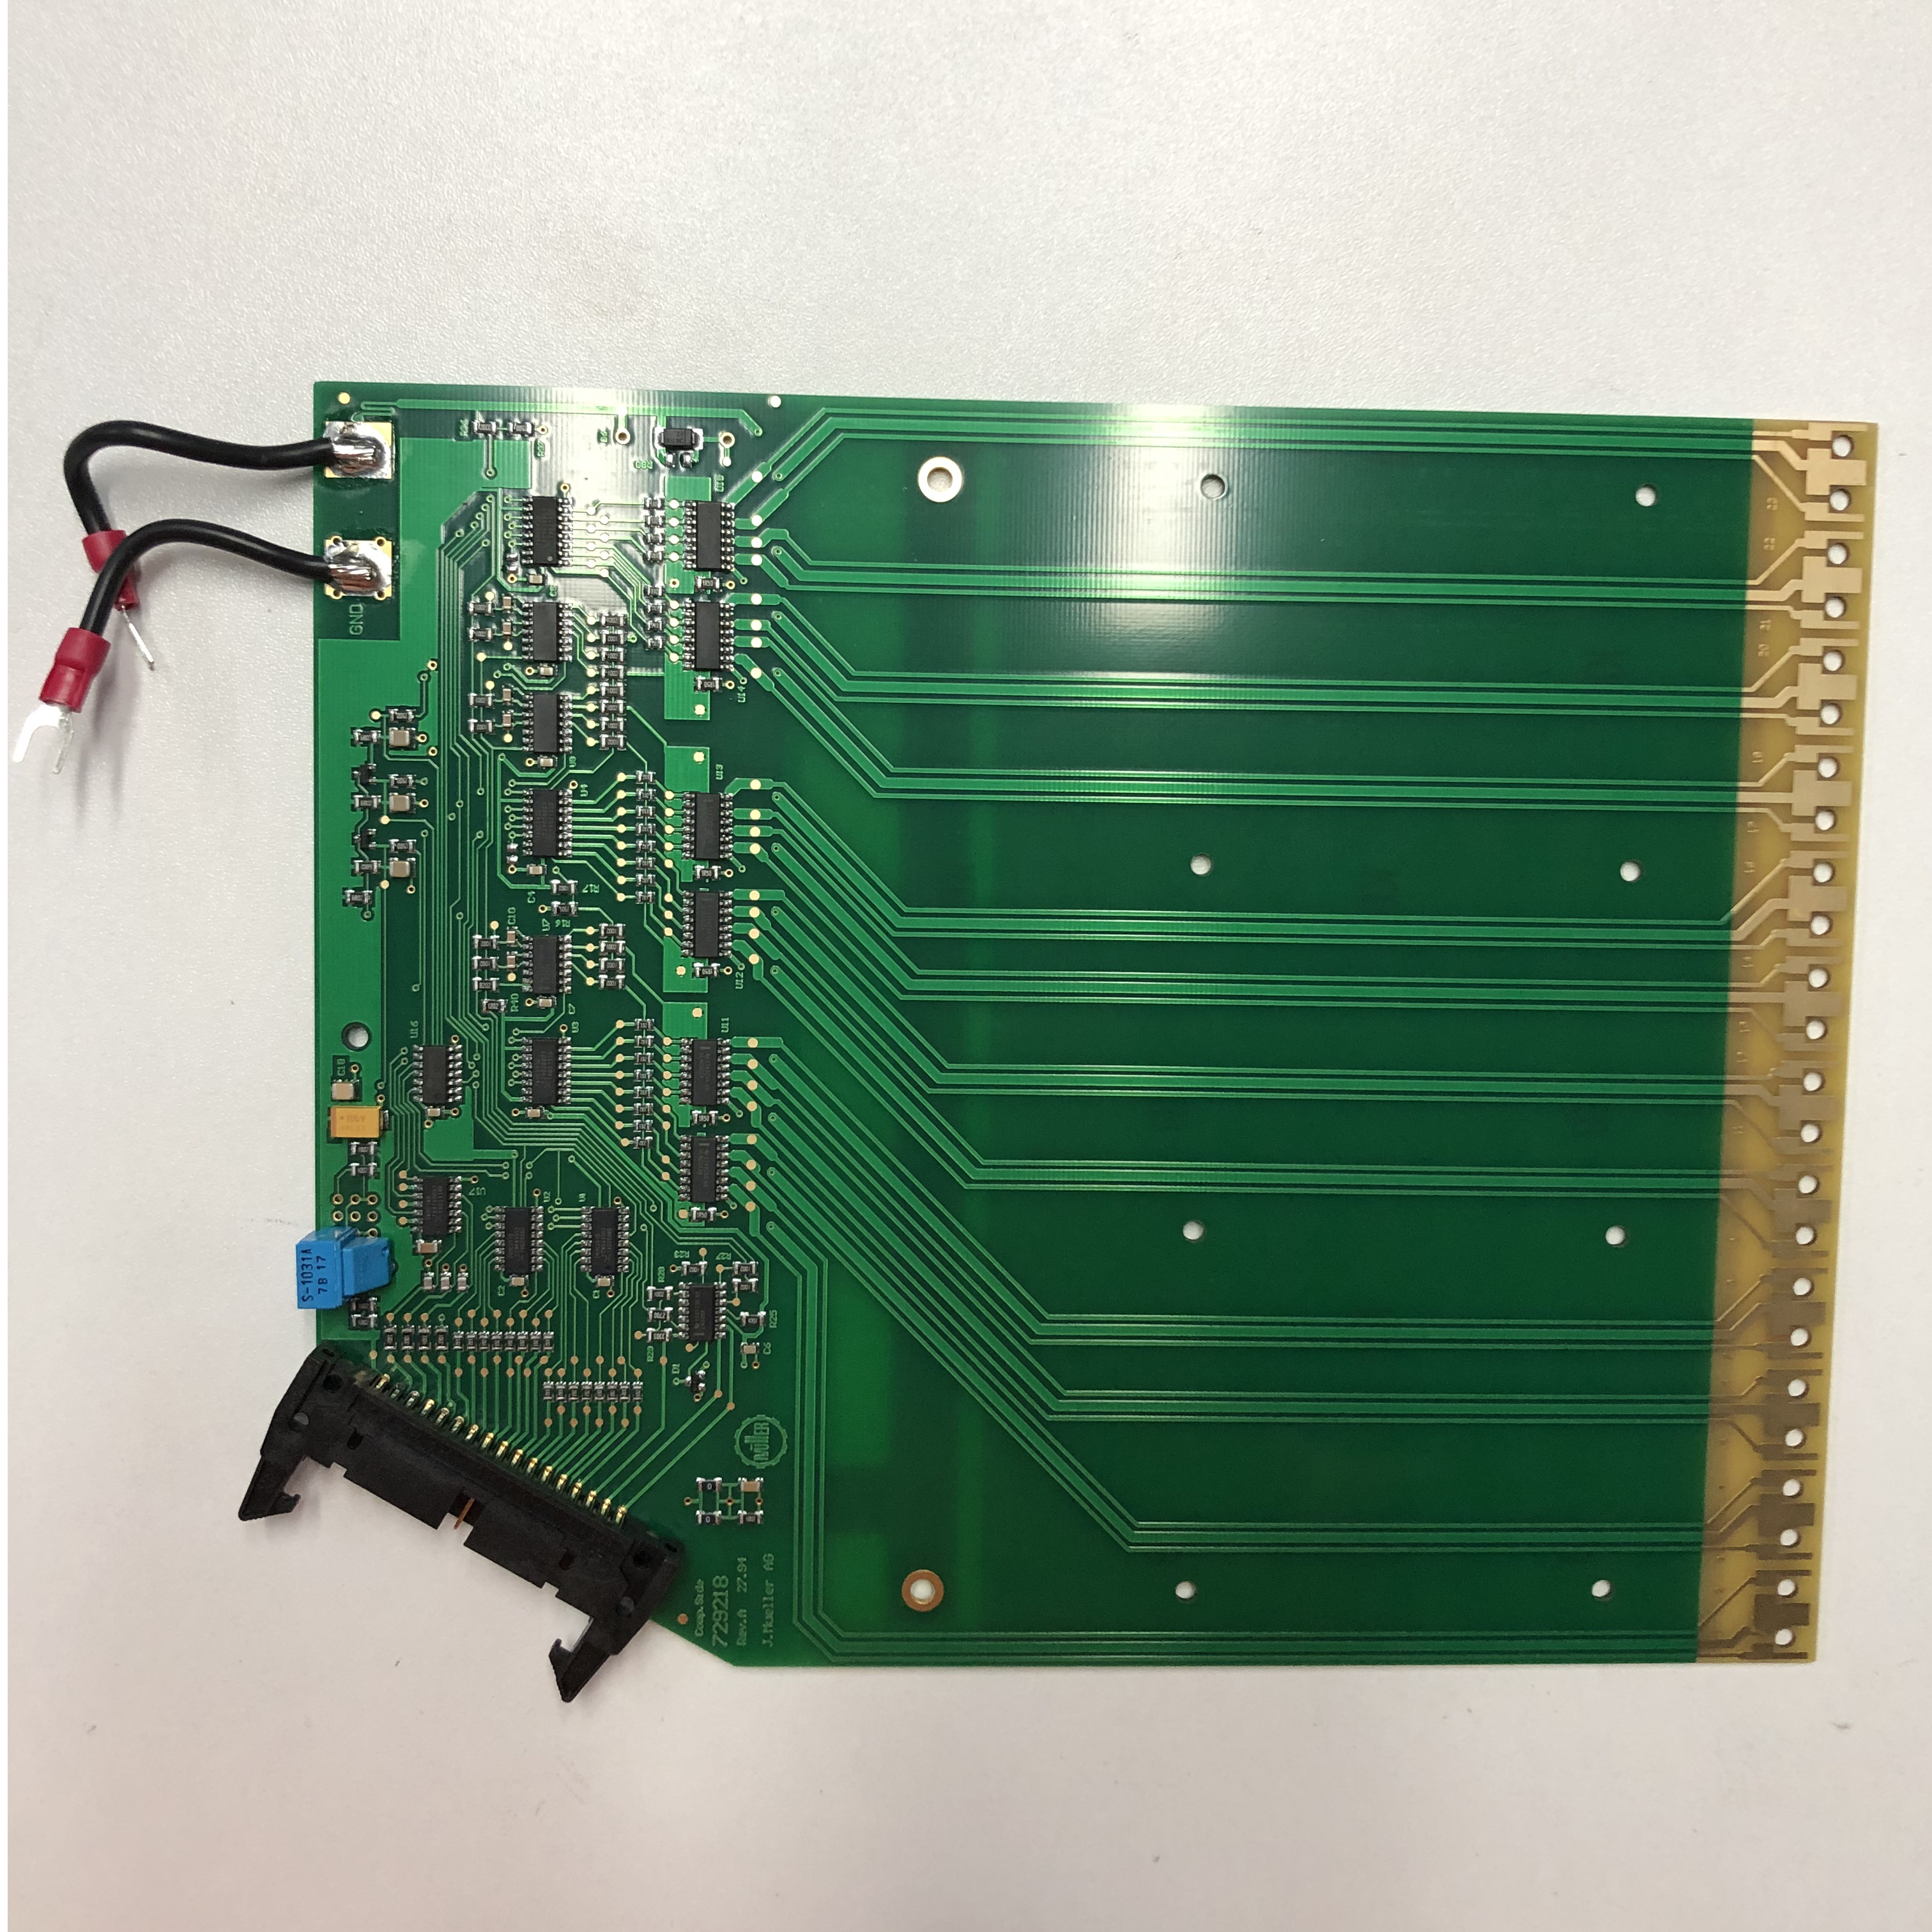 Special Price for Latex Covering Machine - MU-010 magnet PCB 179729218 for Muller Jacquard – Sino